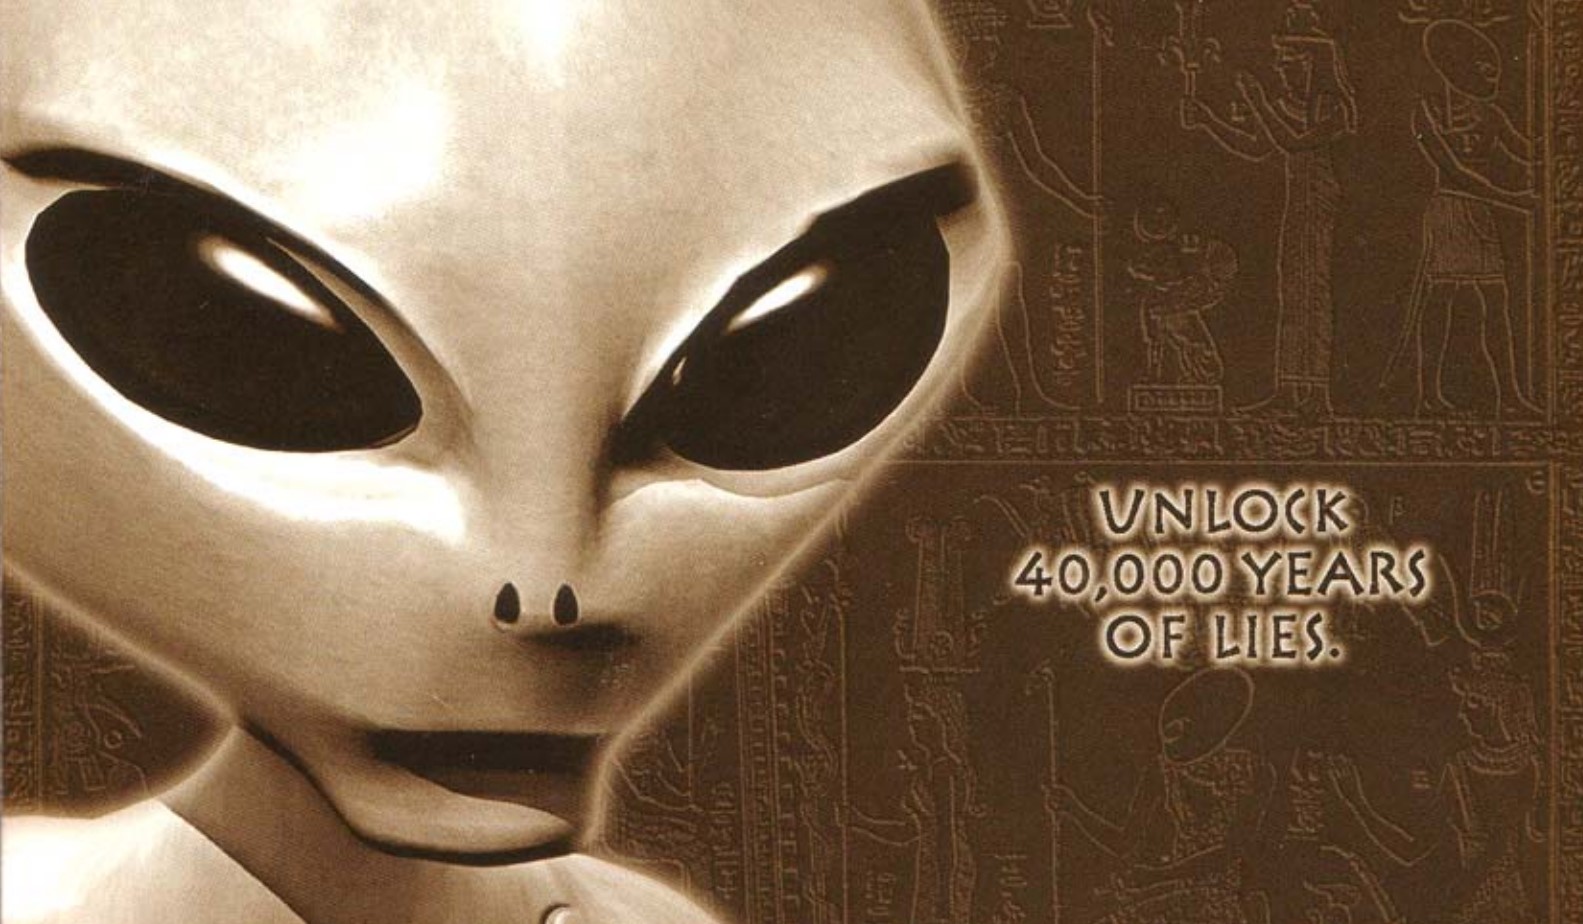  Aliens, conspiracy theories, and a forged diary inspired one of the weirdest games of the '90s 